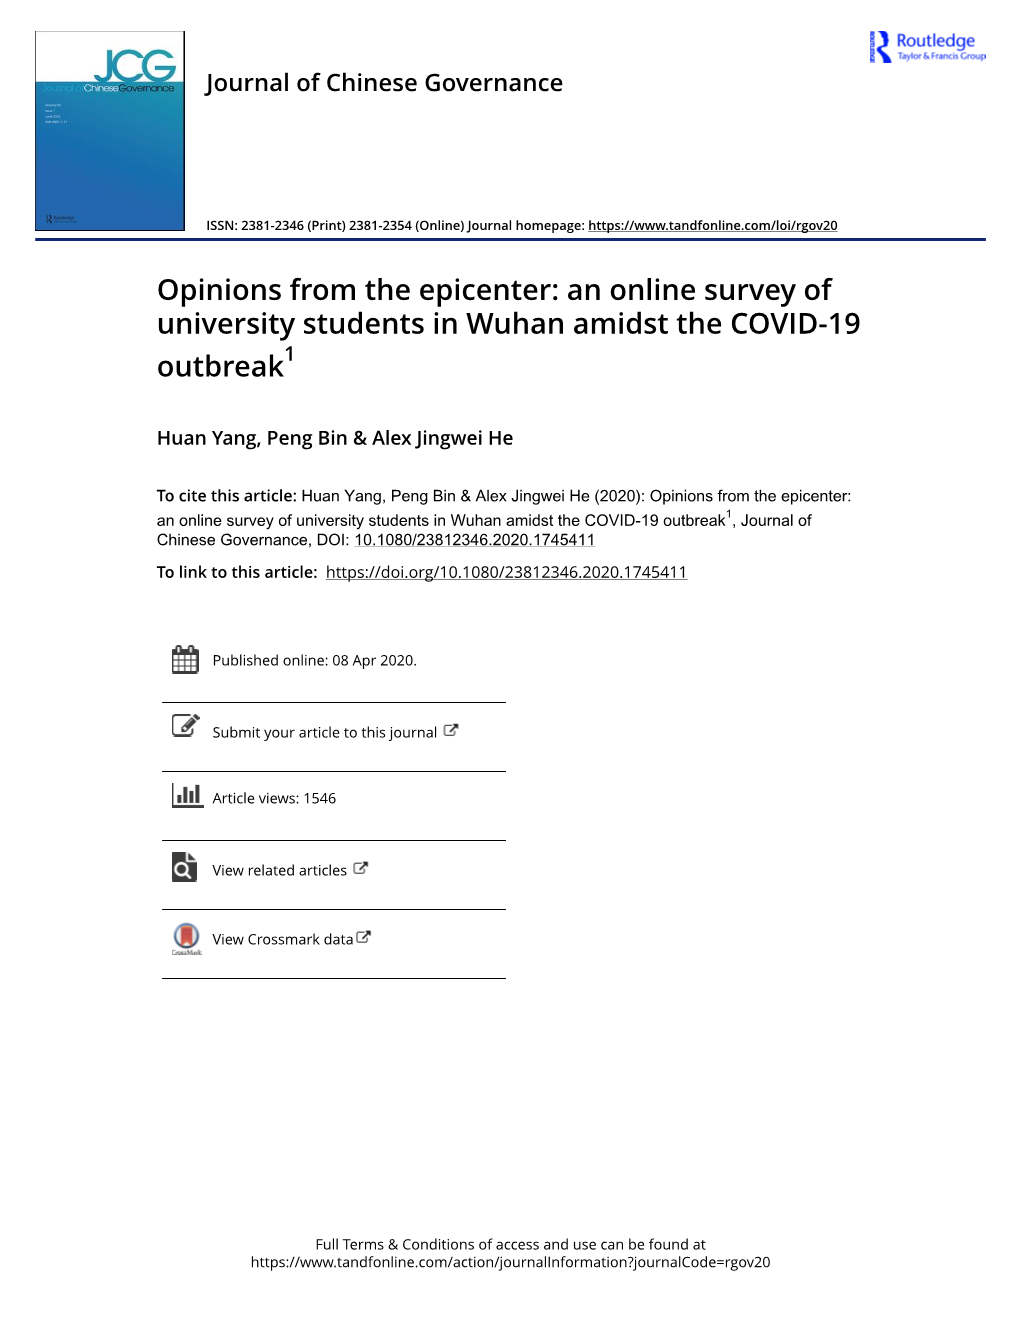 An Online Survey of University Students in Wuhan Amidst the COVID-19 Outbreak1